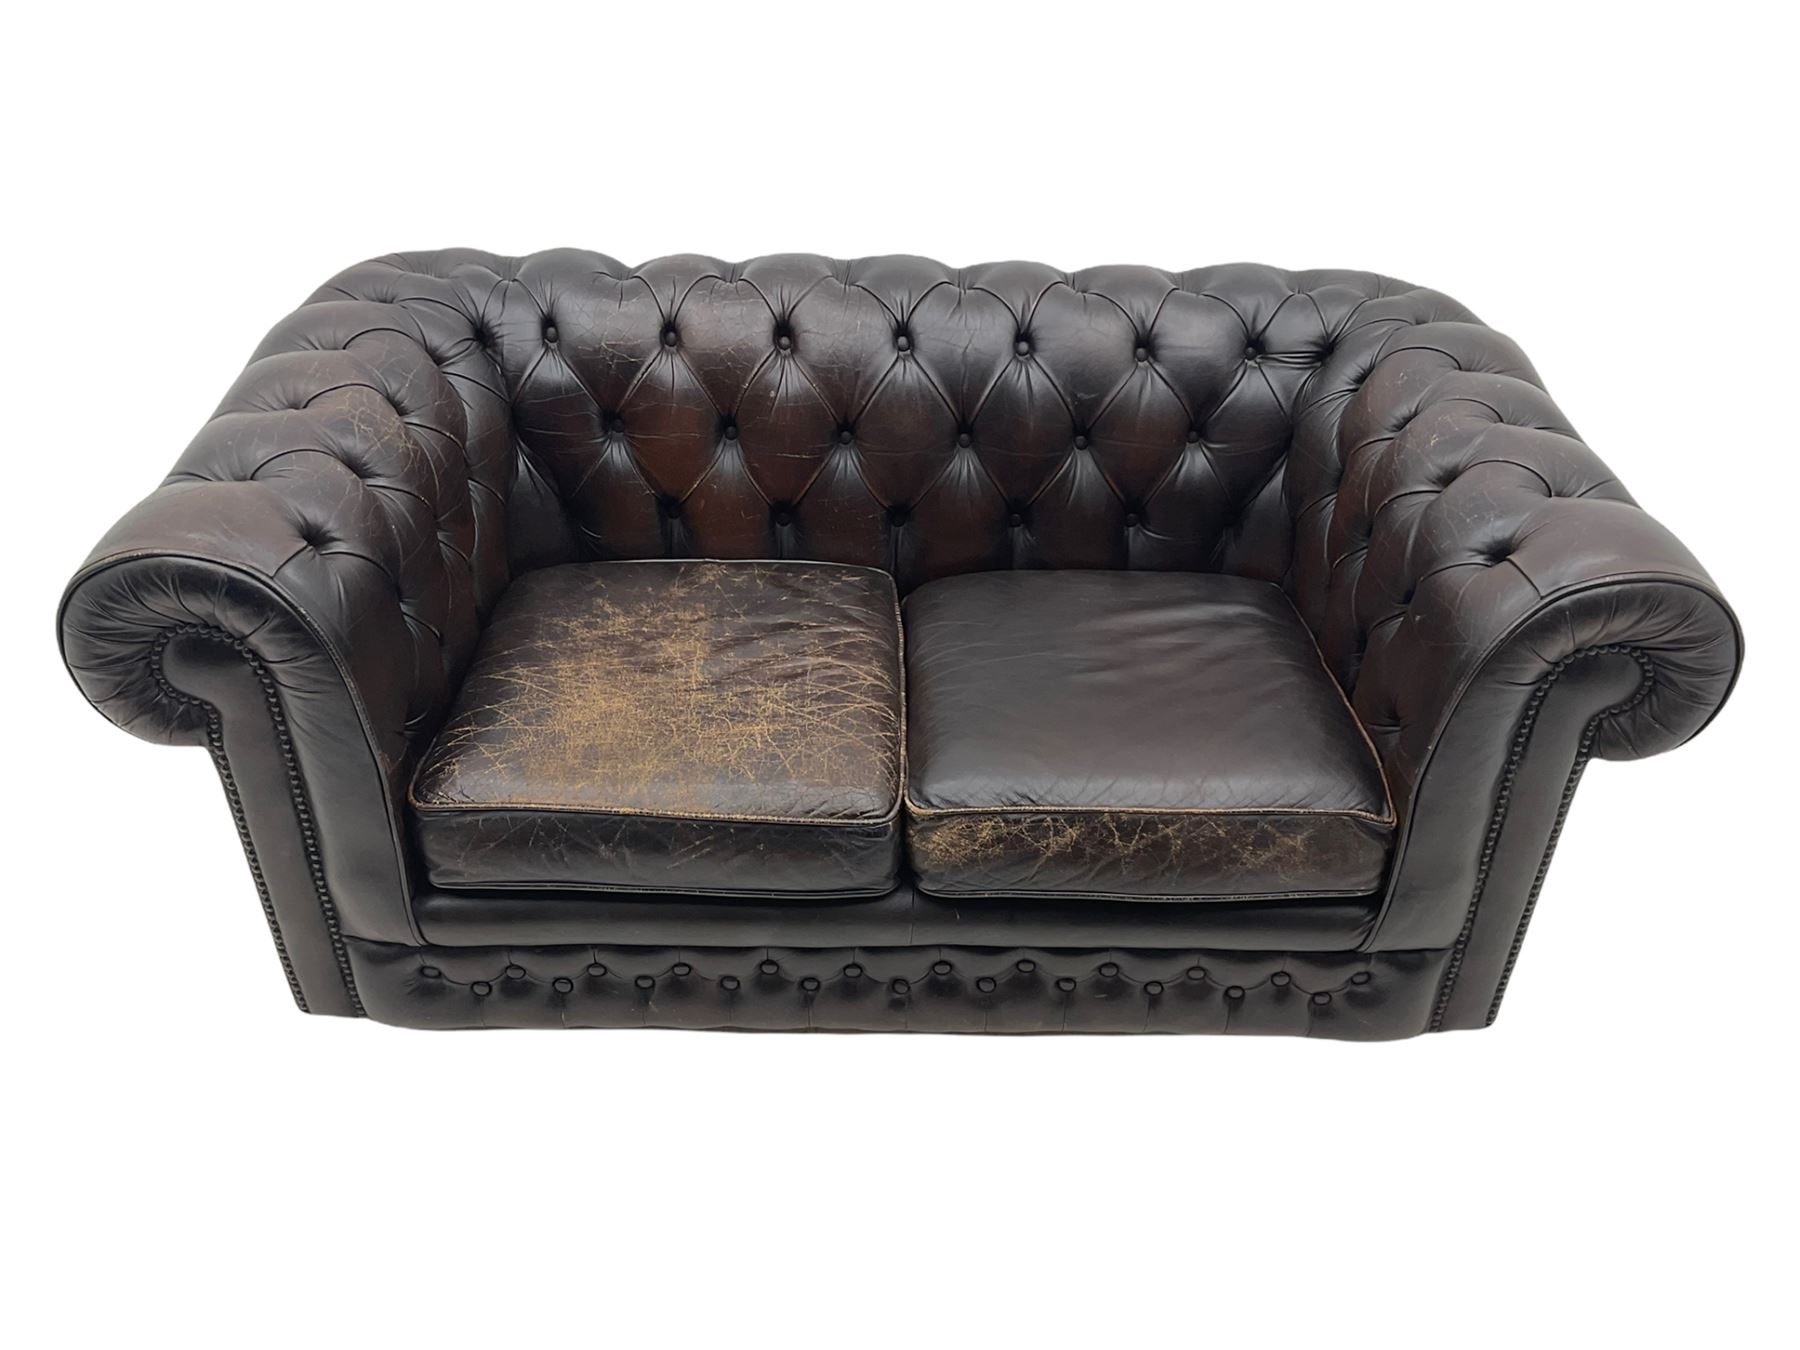 Chesterfield two seat sofa - Image 4 of 8